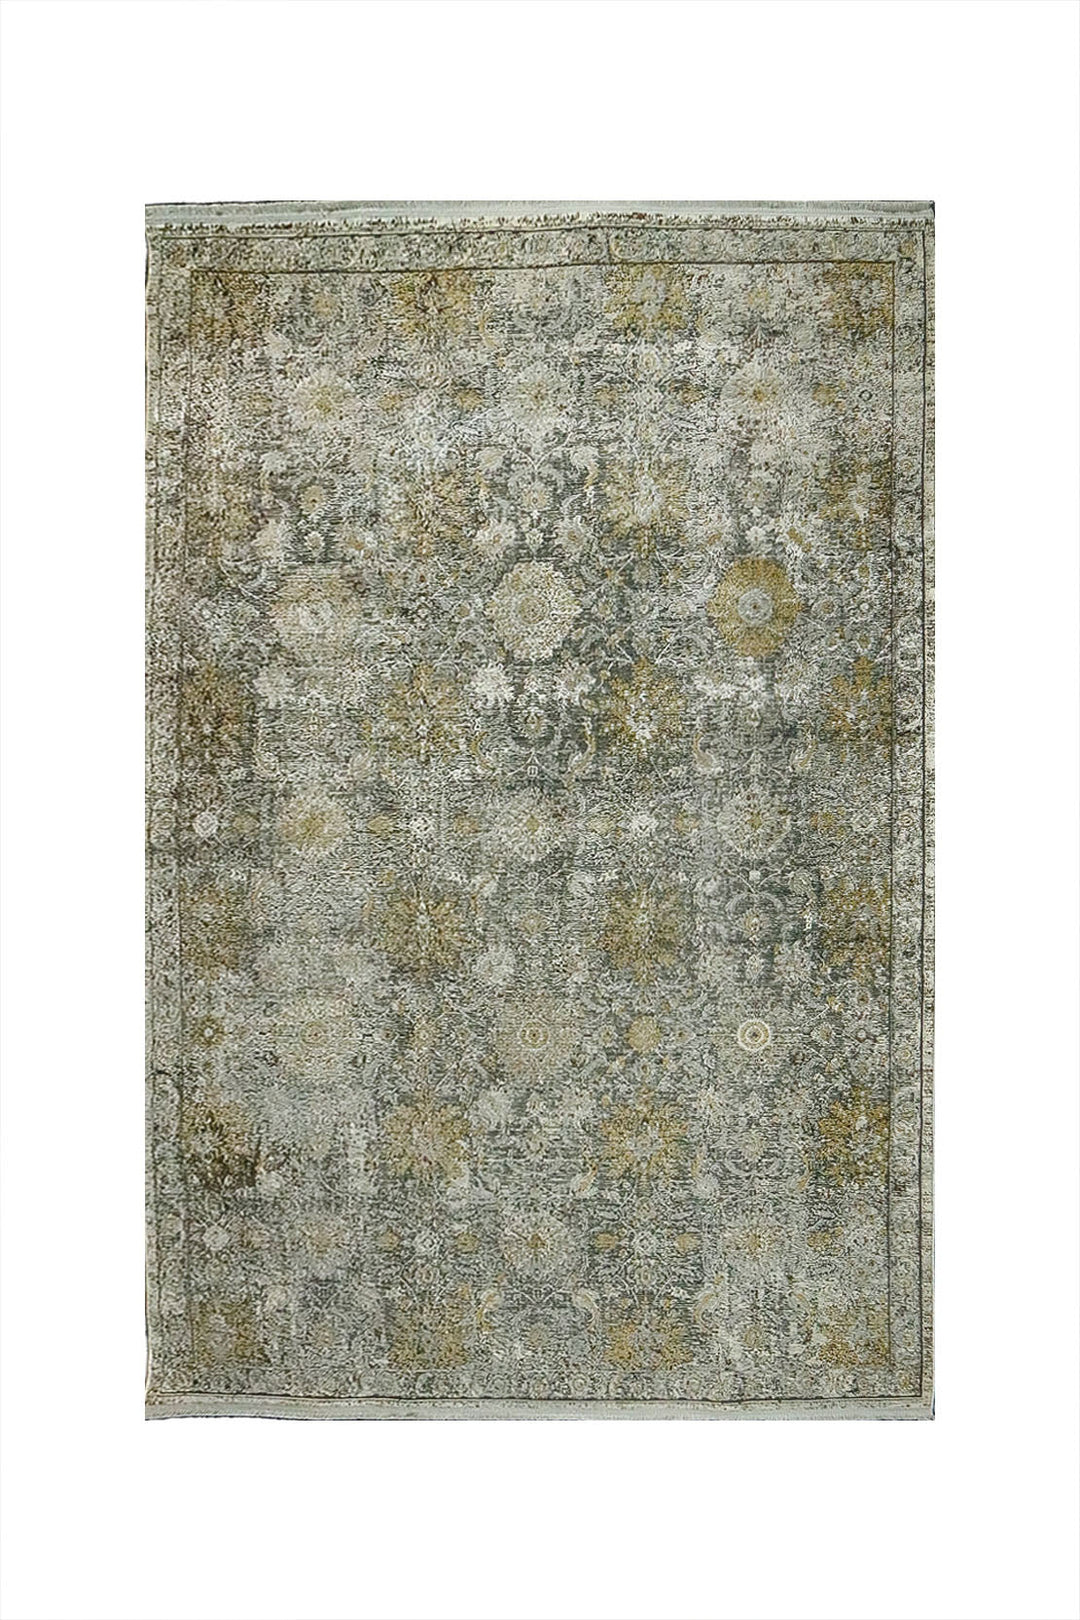 Premium Quality Turkish Brooklyn Rug - 5.24 x 7.54 FT - Gray - Resilient Construction for Long-Lasting Use - V Surfaces